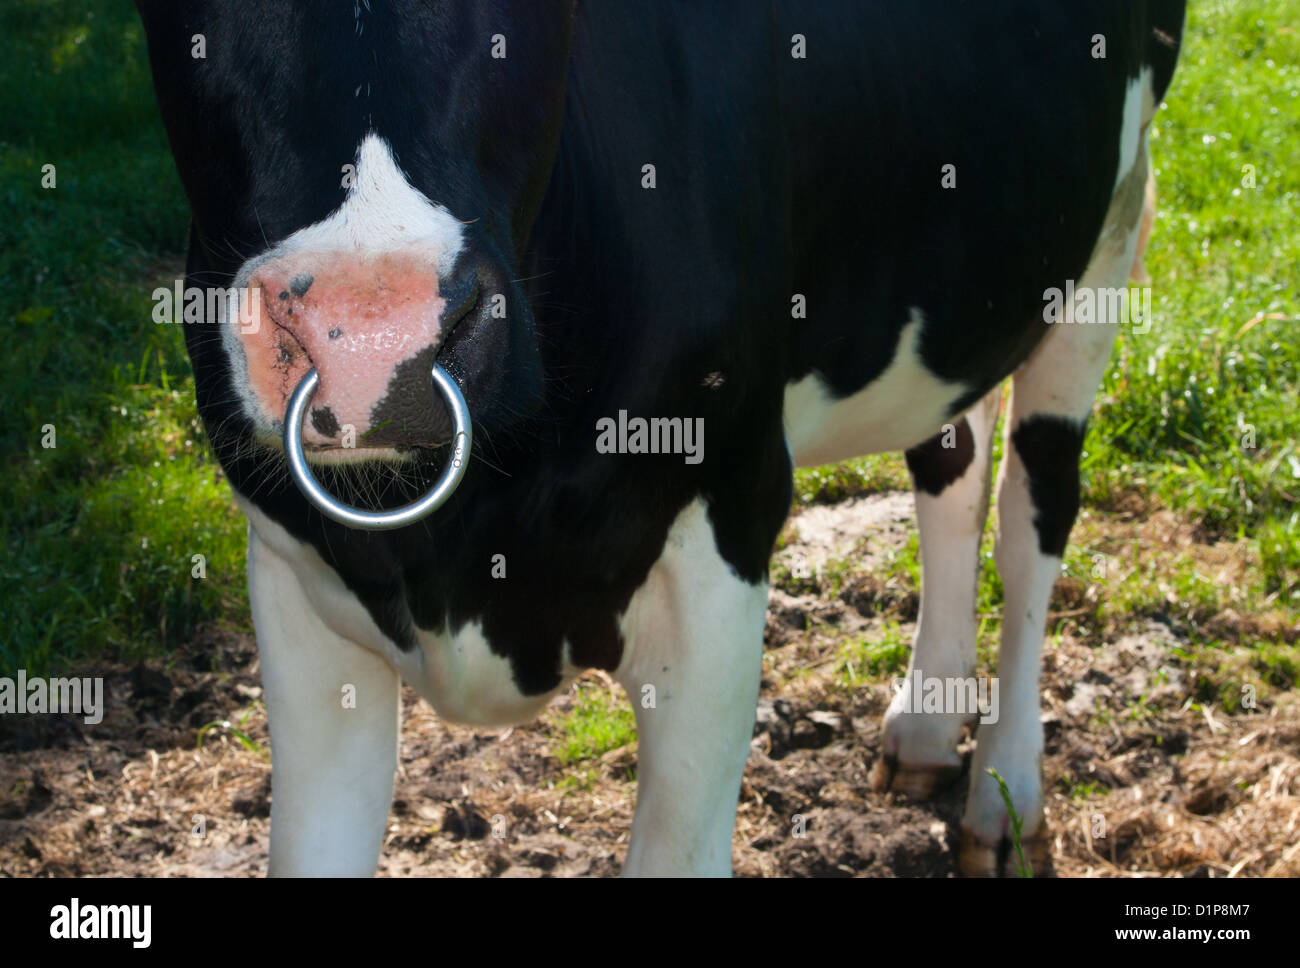 Cow with ring in nose Bull - a Royalty Free Stock Photo from Photocase